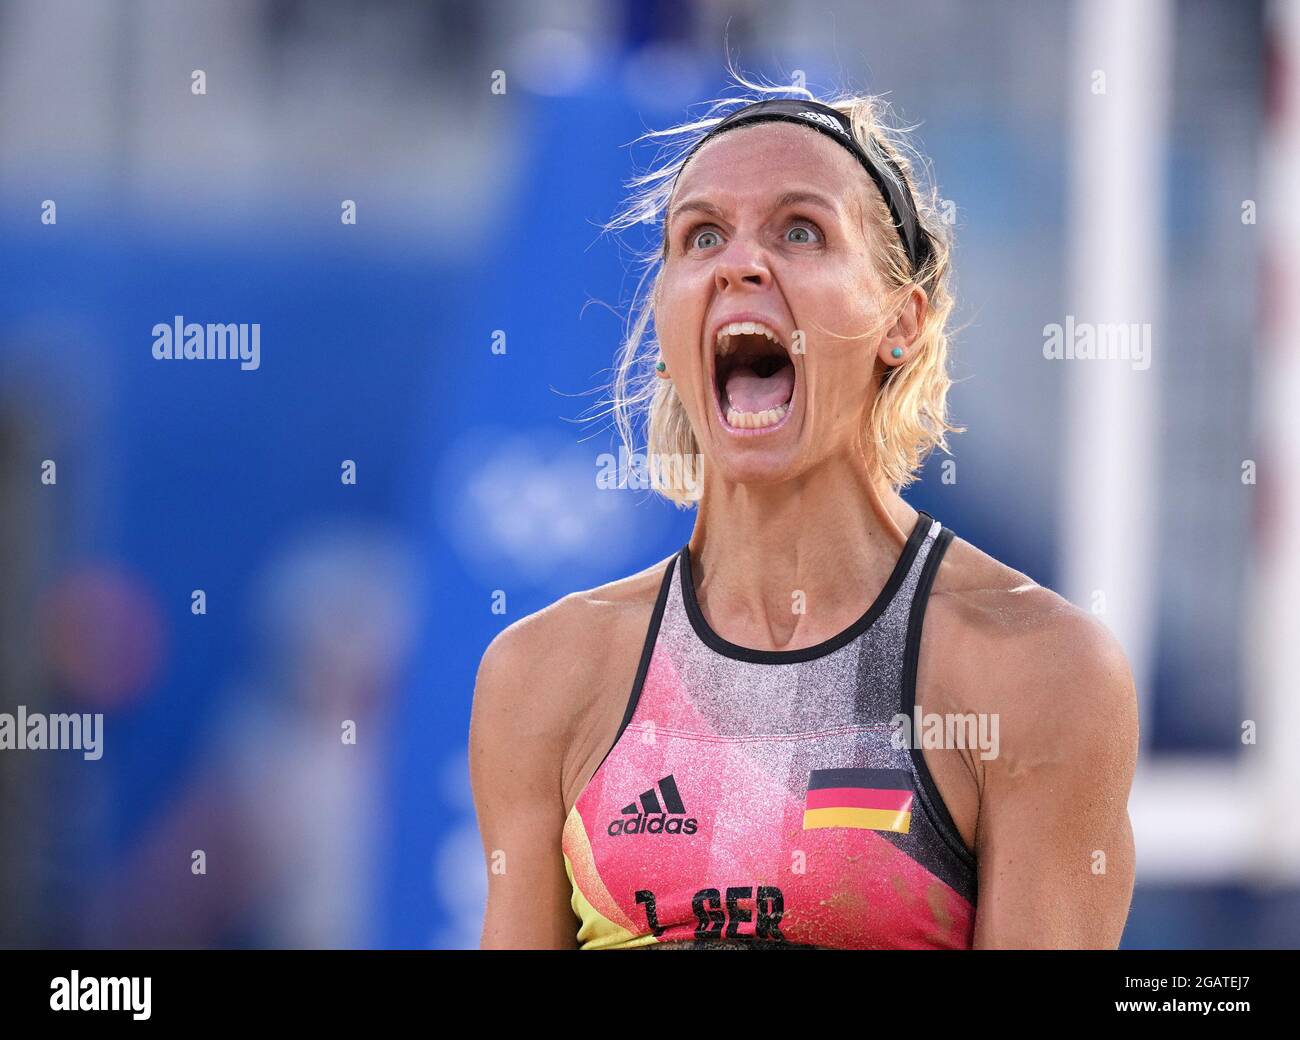 Tokyo, Japan. 1st Aug, 2021. Laura Ludwig of Germany reacts after winning the women's beach volleyball round of 16 match between Margareta Kozuch/Laura Ludwig of Germany and Agatha Bednarczuk/Eduarda Santos Lisboa of Brazil at the Tokyo 2020 Olympic Games in Tokyo, Japan, Aug. 1, 2021. Credit: Li He/Xinhua/Alamy Live News Stock Photo